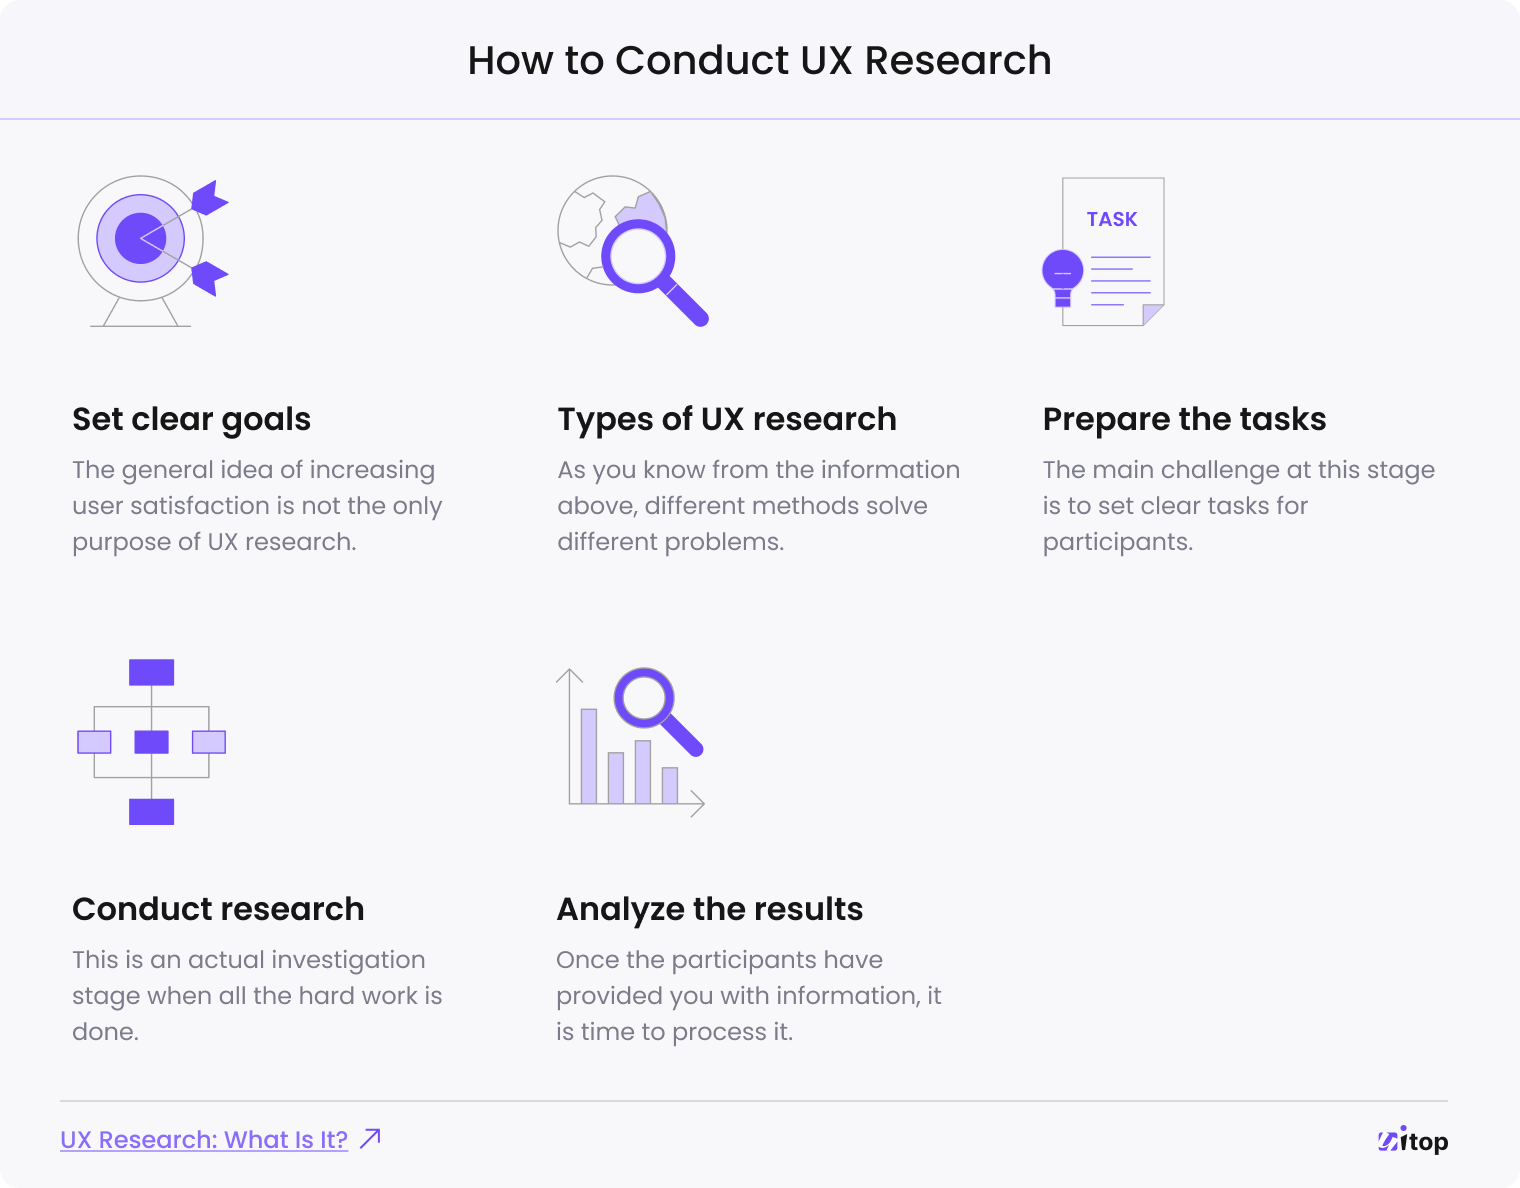 conducting UX research